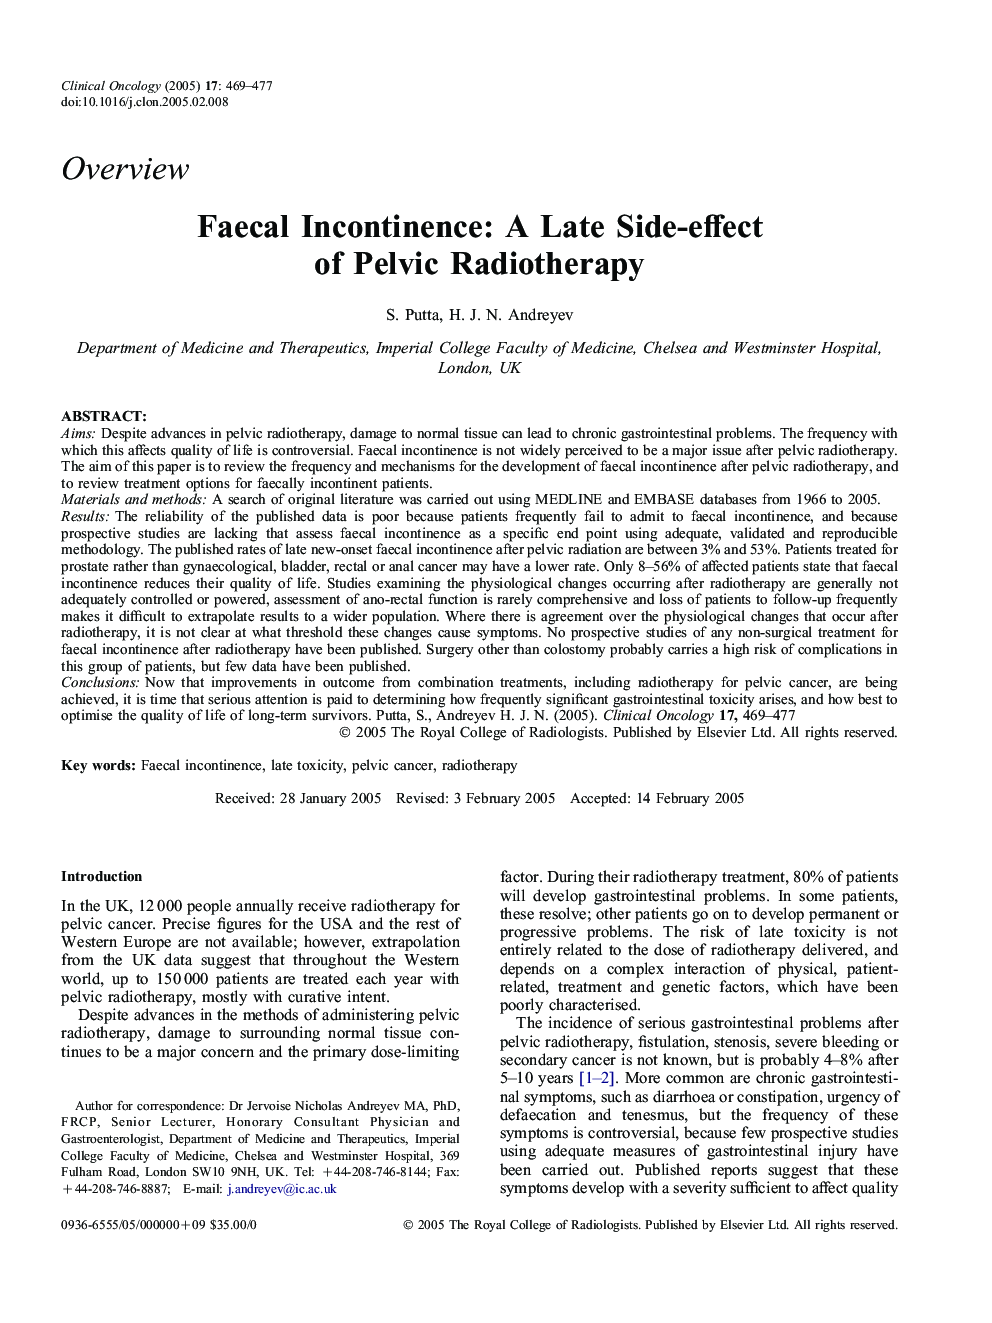 Faecal Incontinence: A Late Side-effect of Pelvic Radiotherapy